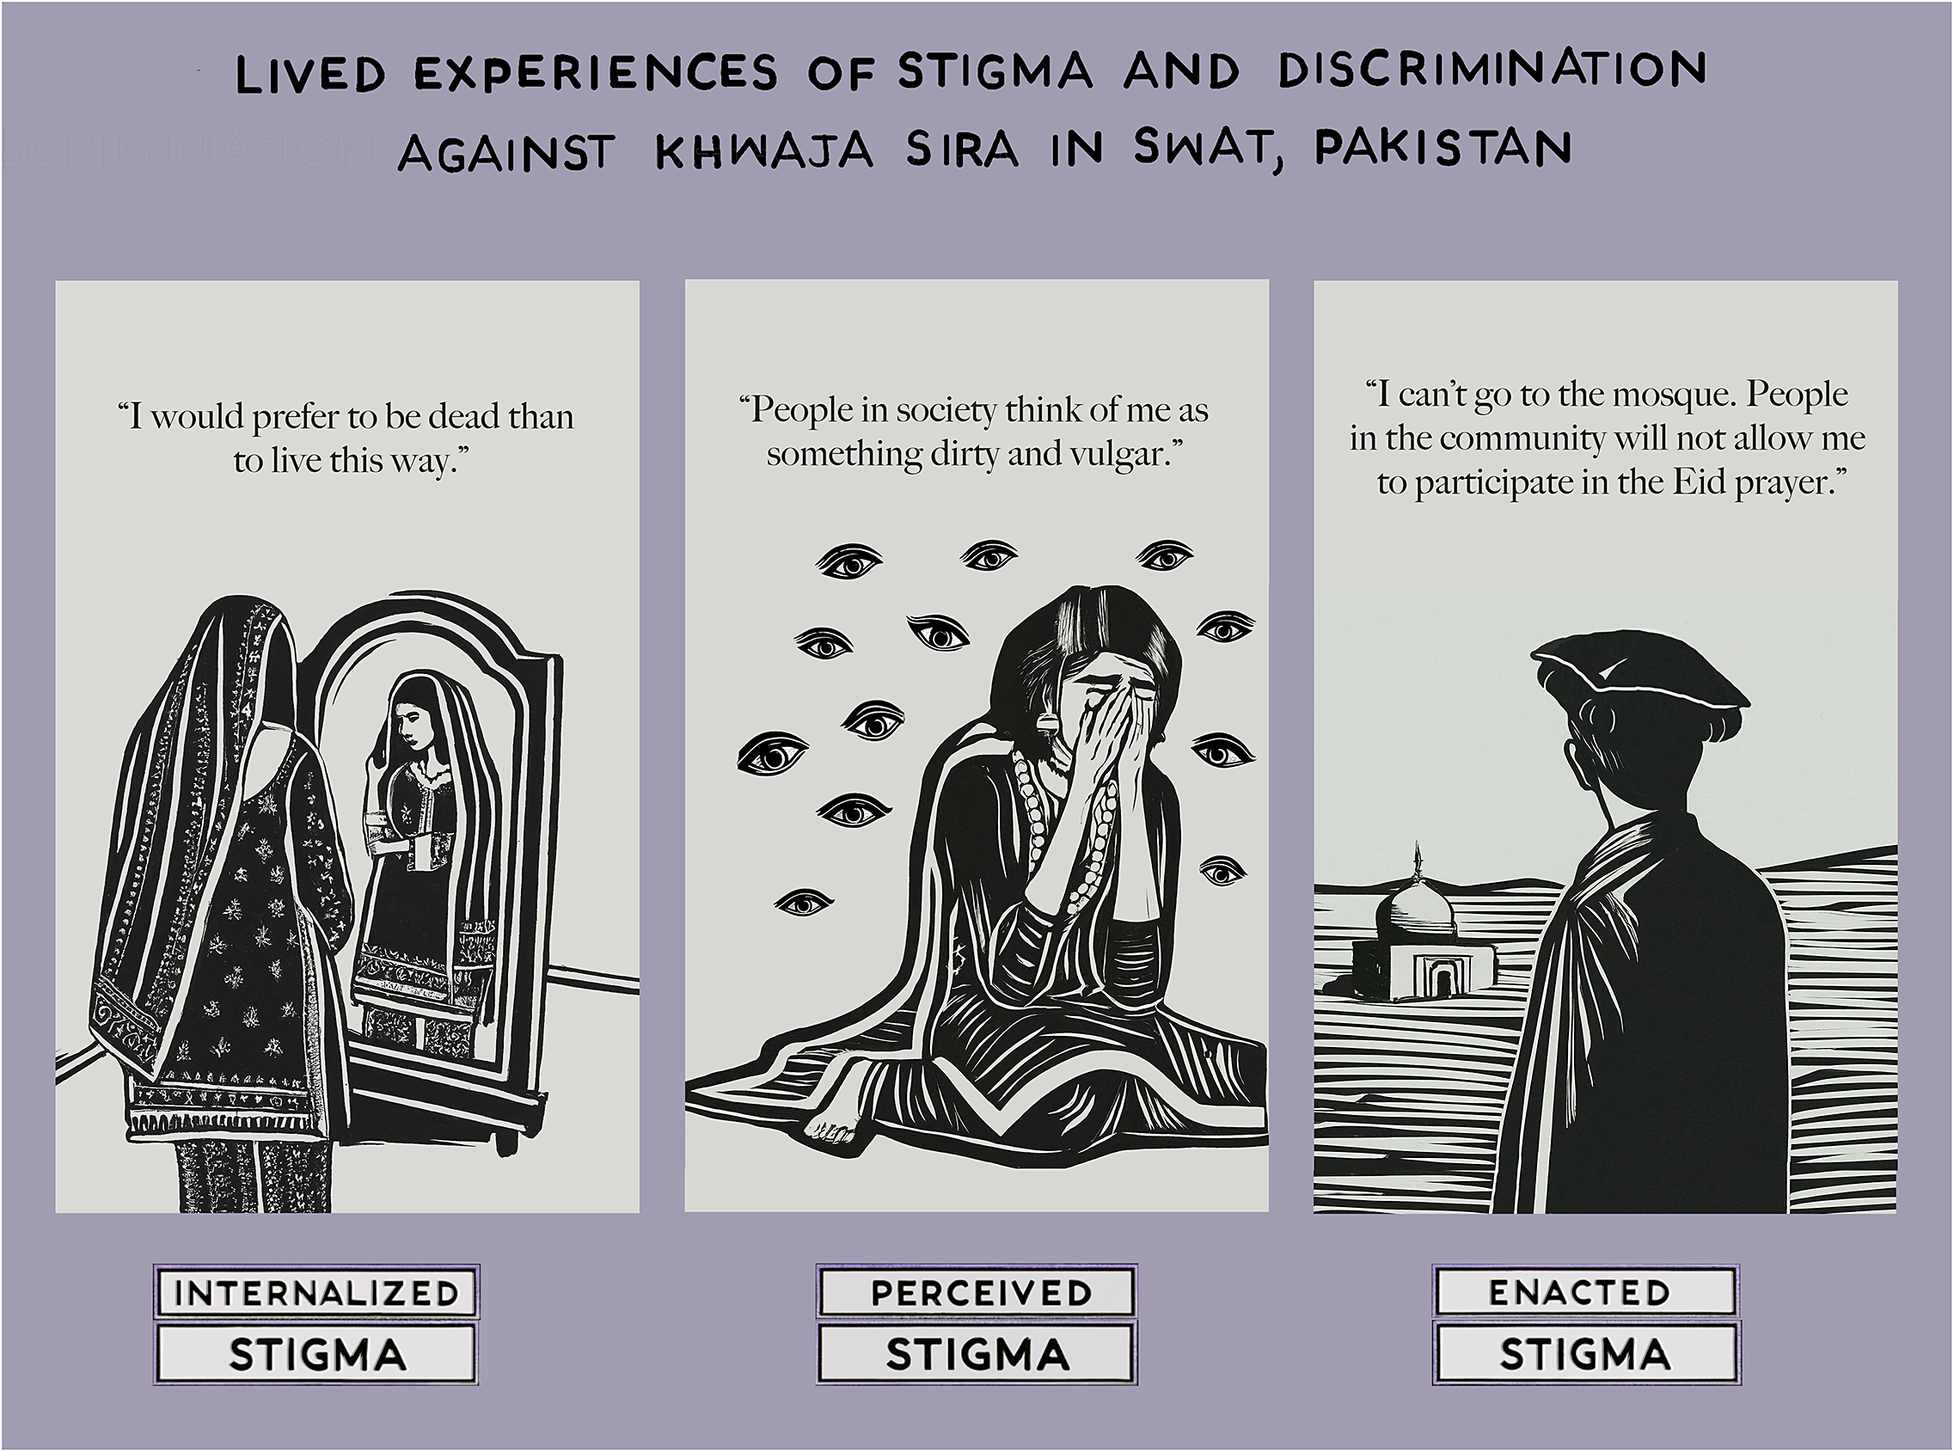 graphical abstract for “I would prefer to be dead than to live this way”: Lived experiences of stigma and discrimination against khwaja sira in Swat, Pakistan - open in full screen